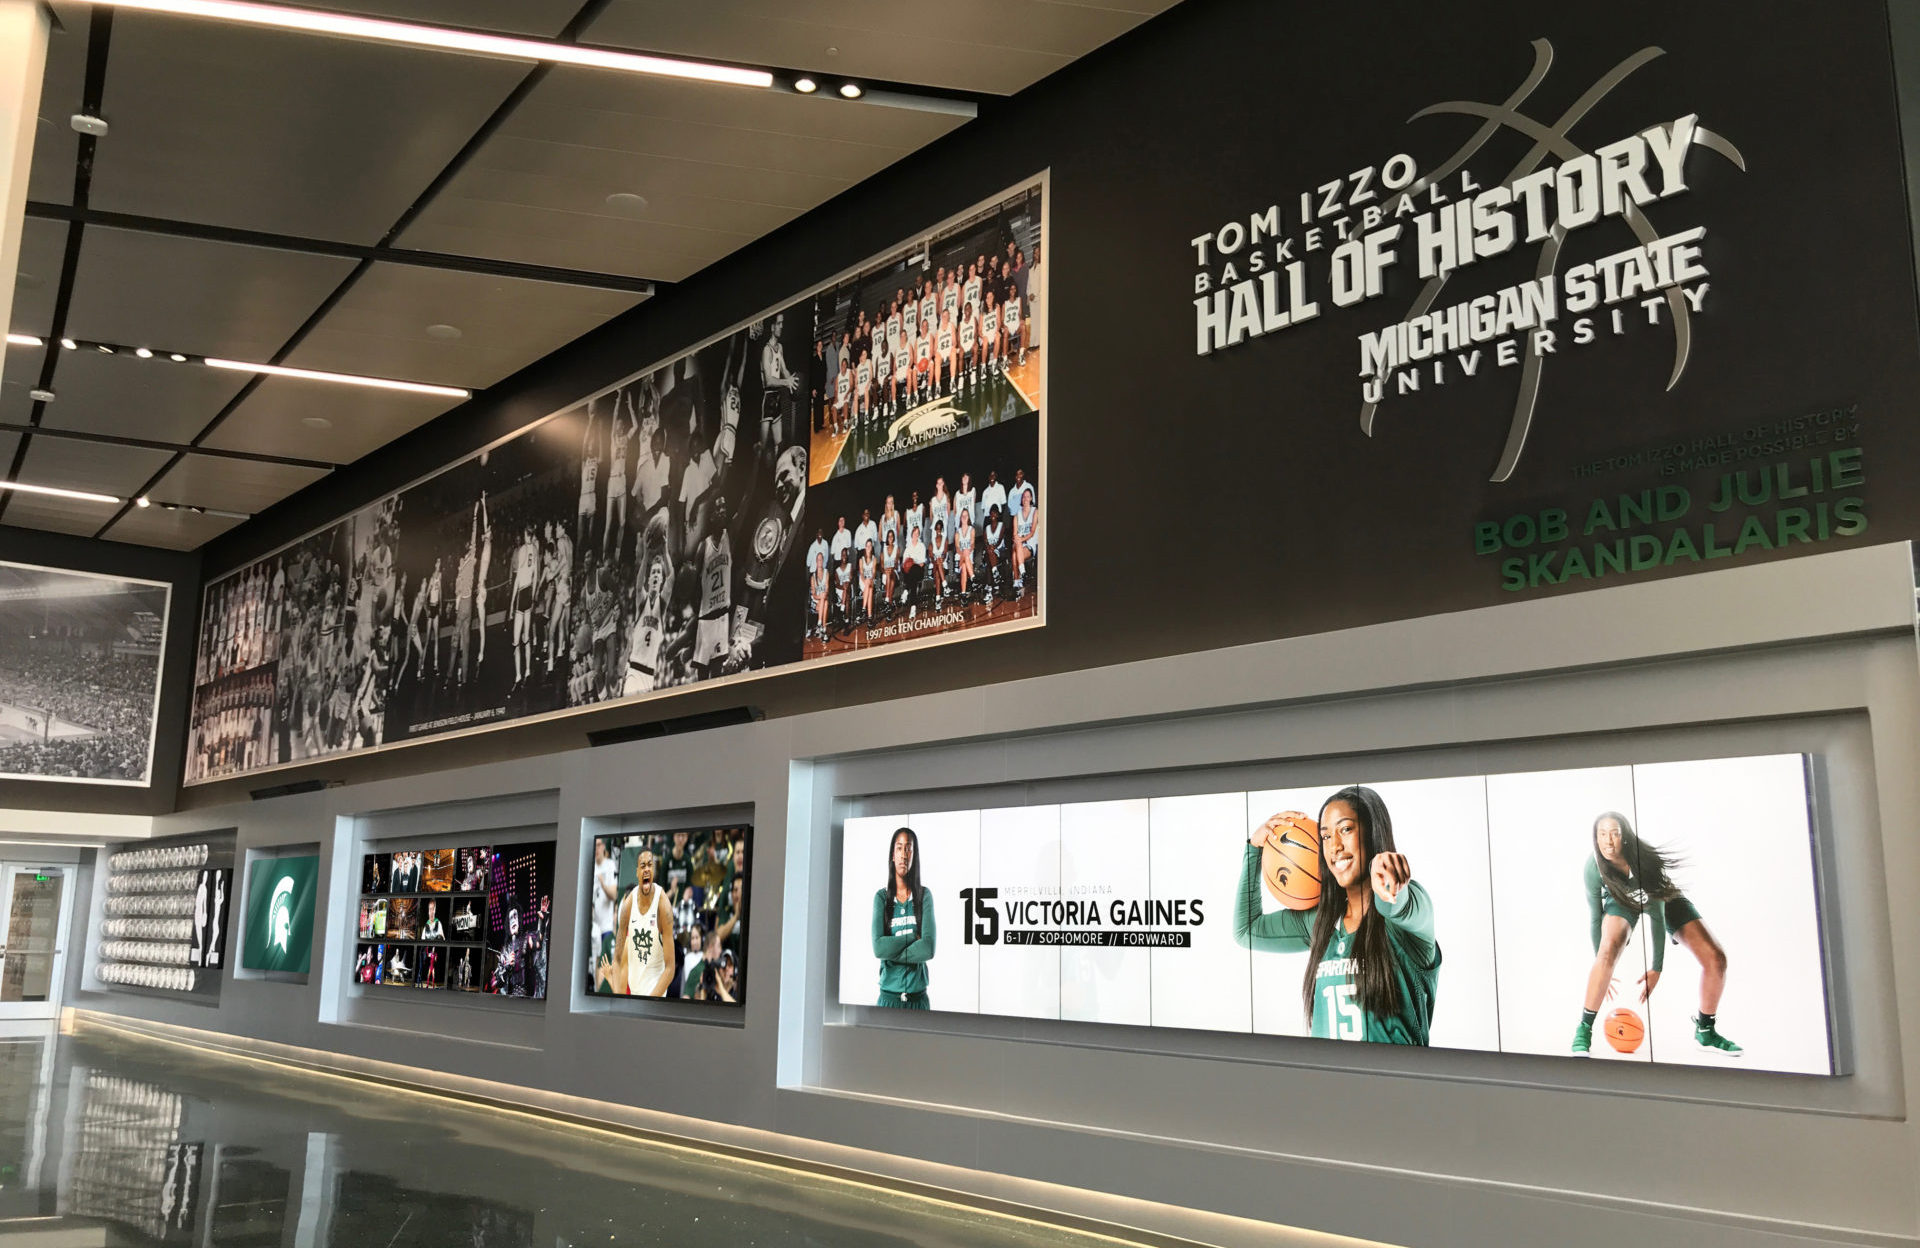 Hall of History, College, Michigan State University, Spartan, Basketball, MSU, AJP, Anthony James Partners, Big 10 Conference, LED videoboard, LED video display, LED display